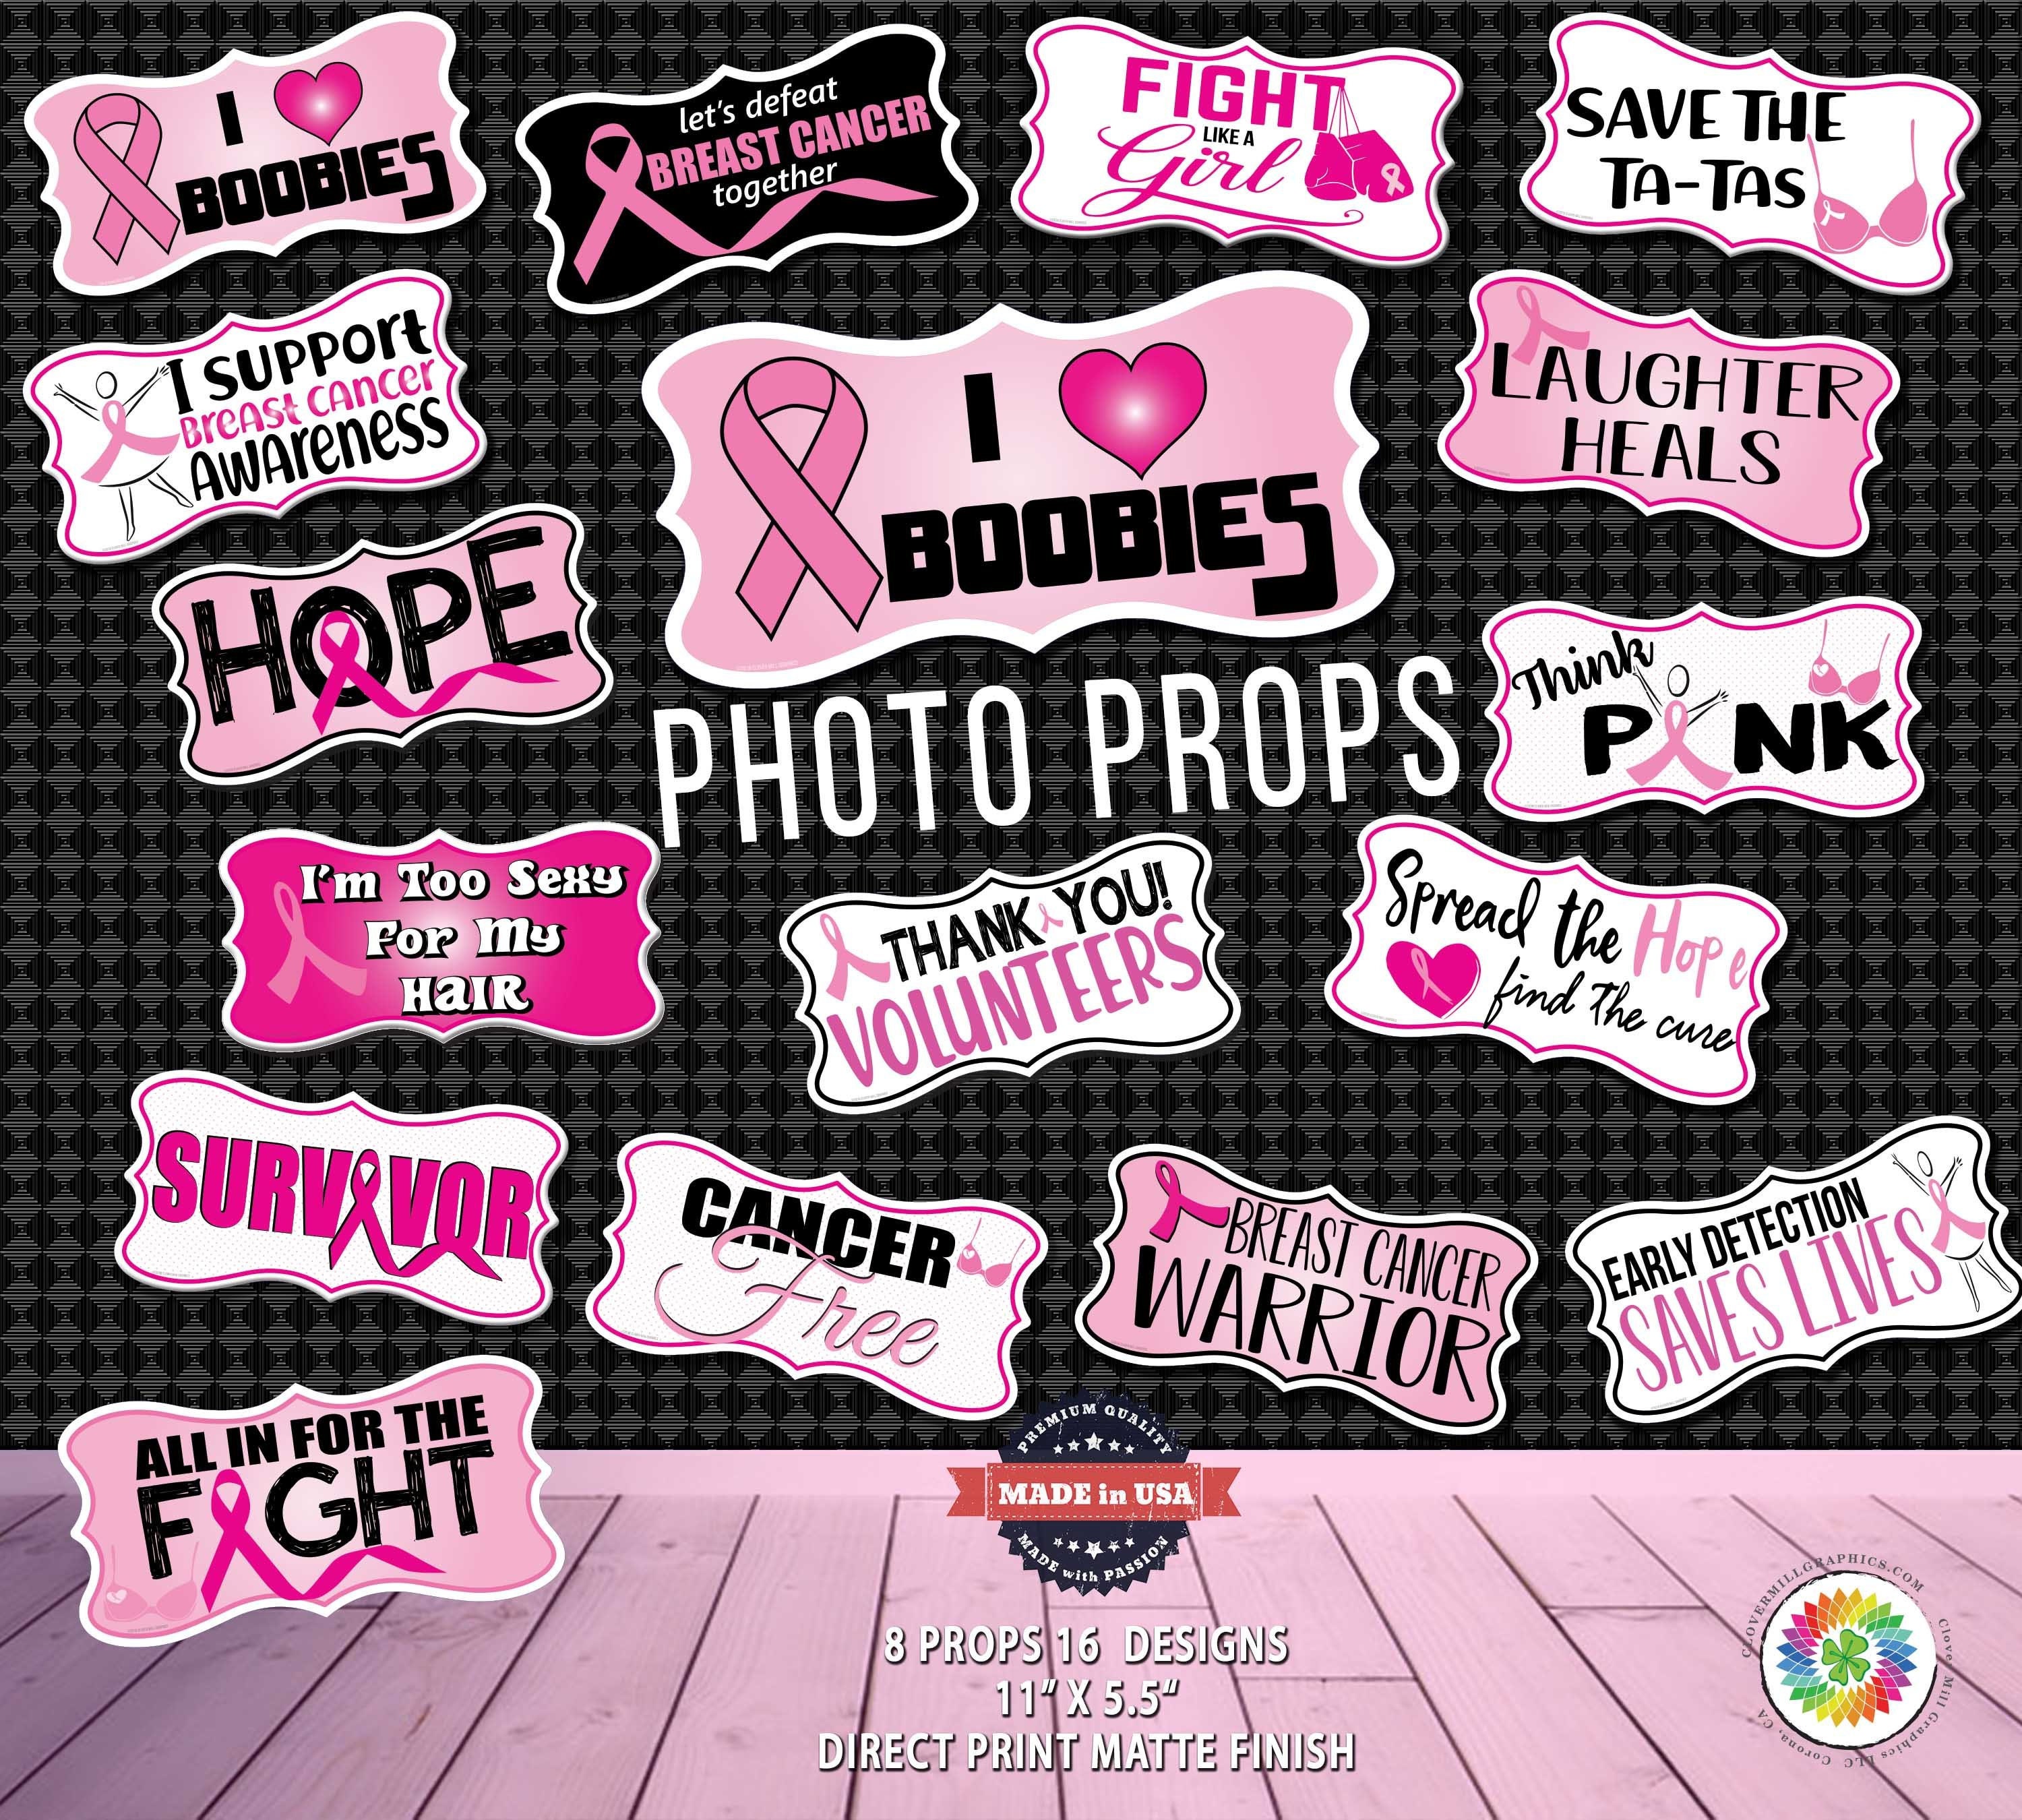 Breast Cancer Awareness Photo Props picture photo